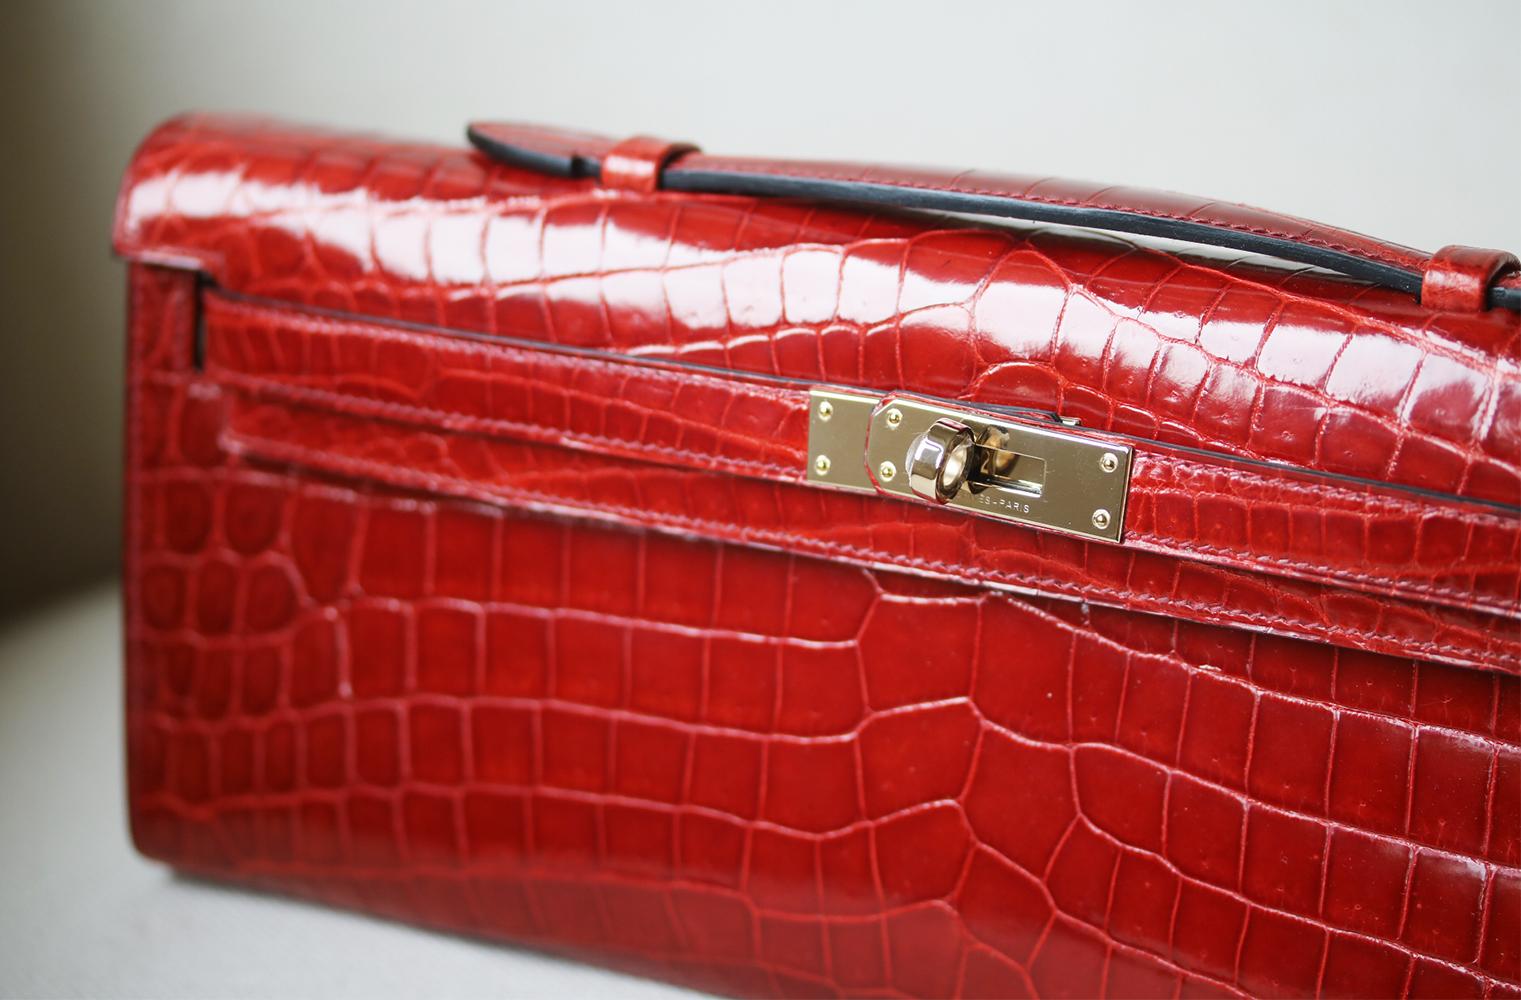 Hermès Kelly Cut Niloticus Crocodile Clutch with gold-plated hardware. Single flat top handle. Tonal leather lining. Single slit pocket at interior wall. Turn-lock closure at front. Colour: burgundy-red. Does not come with a dustbag or box. 